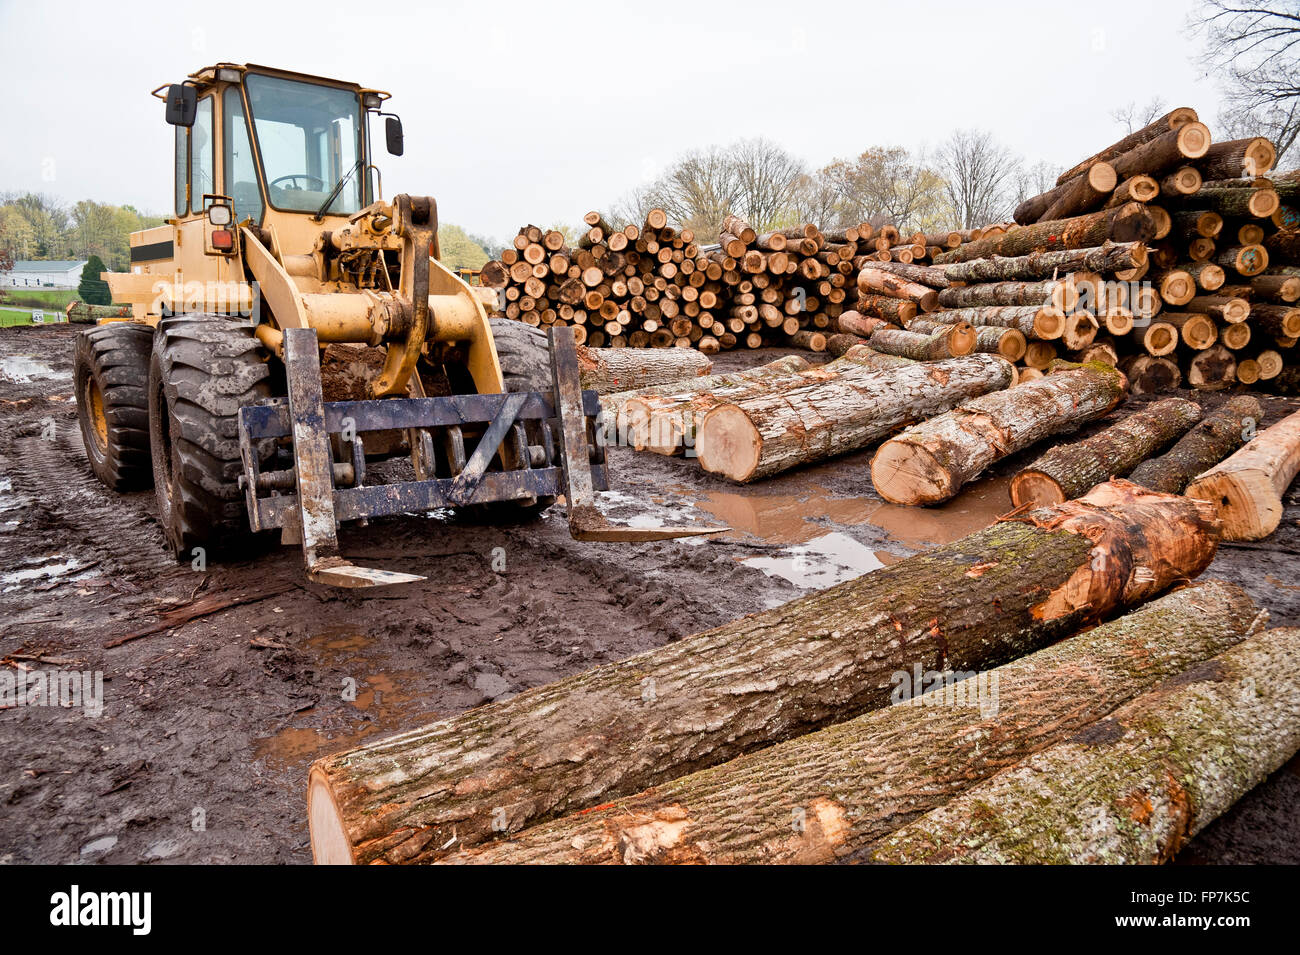 Forklift With Logs in Lumber Area Stock Photo